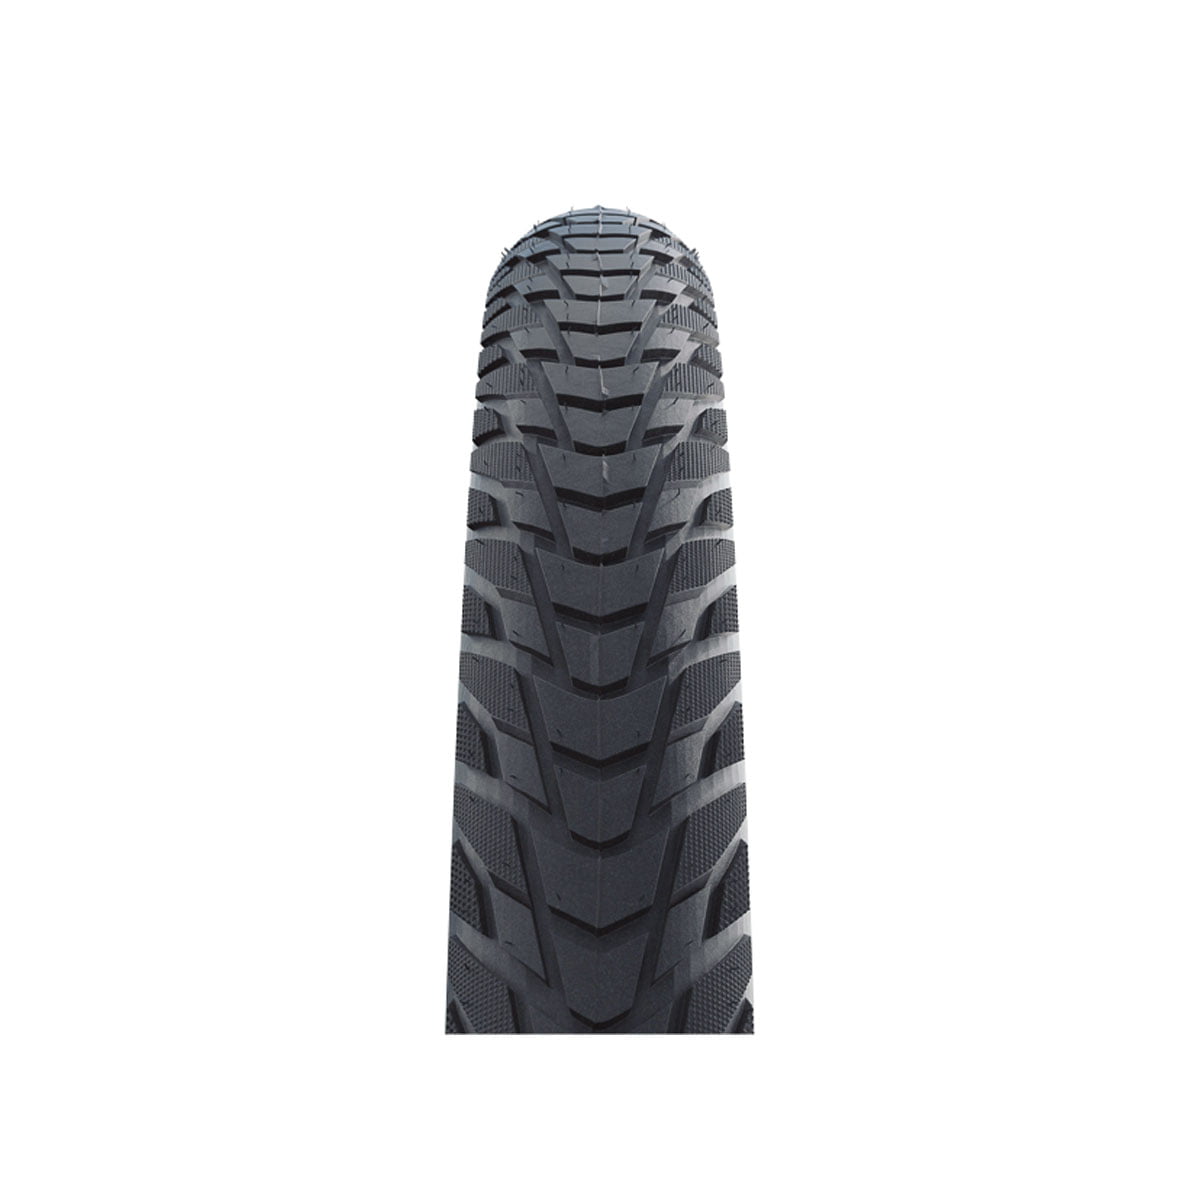 Schwalbe Mountain Tire Tread Cutting Tool for sale online 